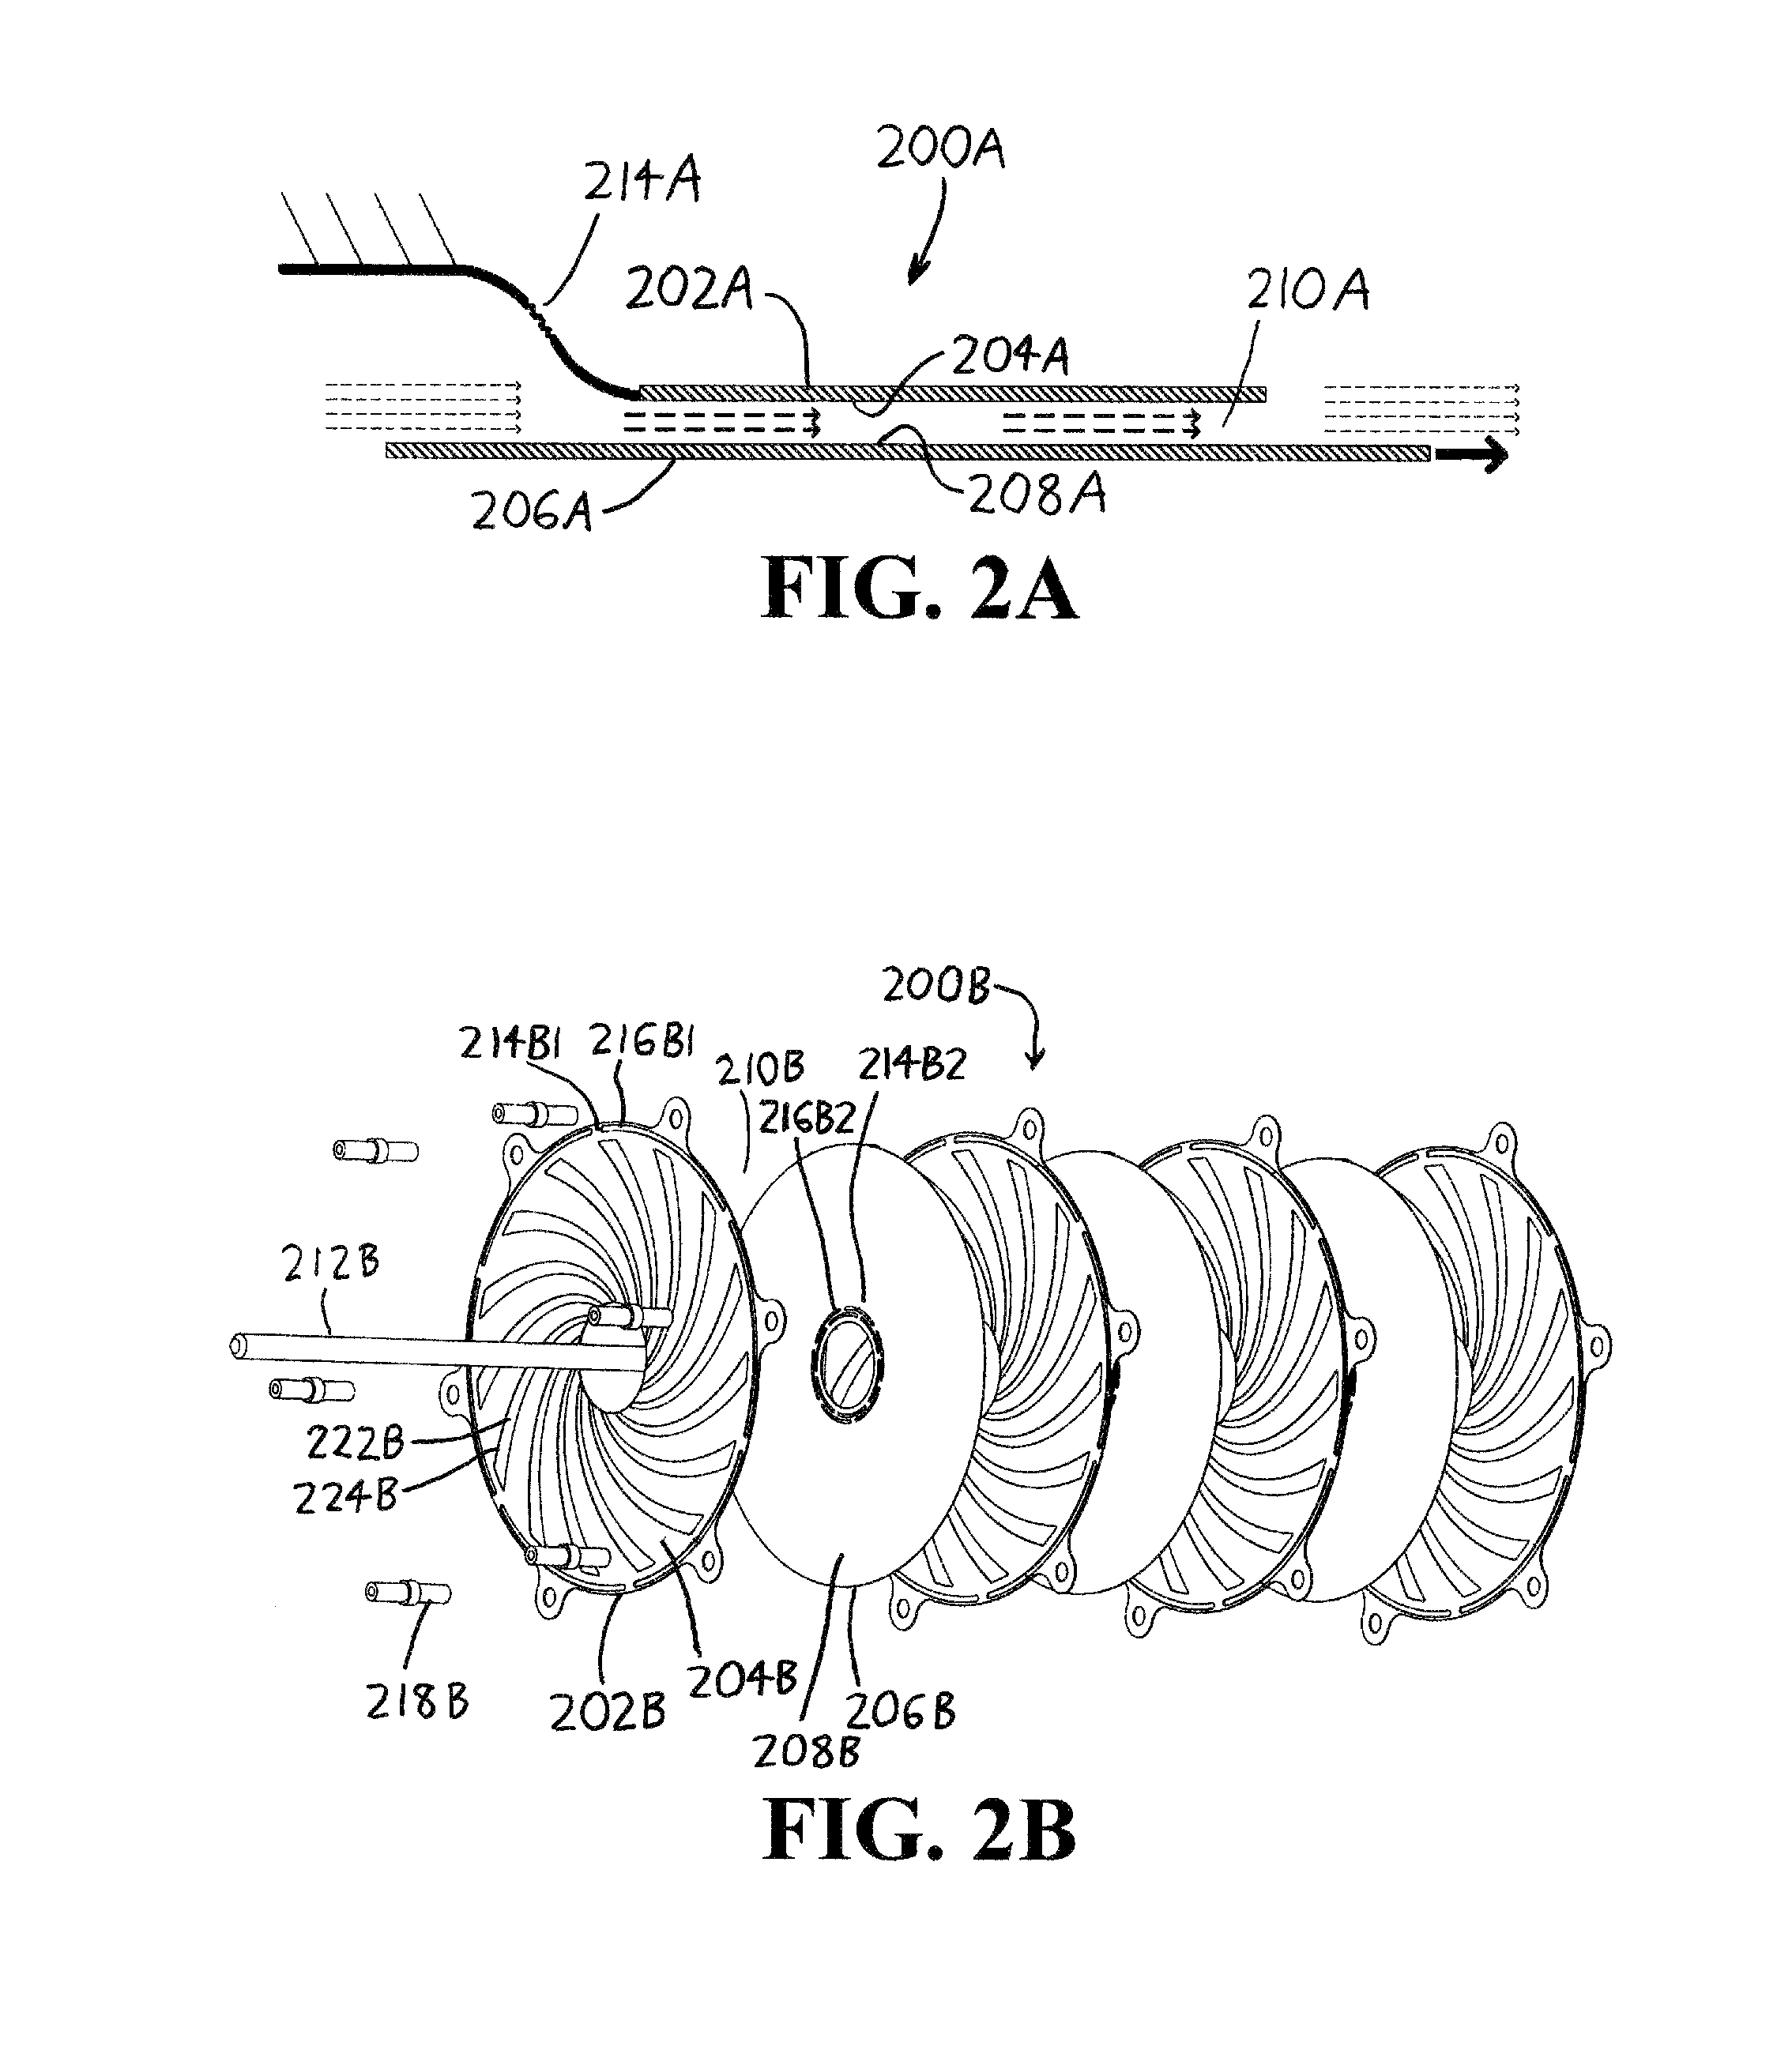 Self-conforming plates for capacitive machines such as electrostatic motors and generators